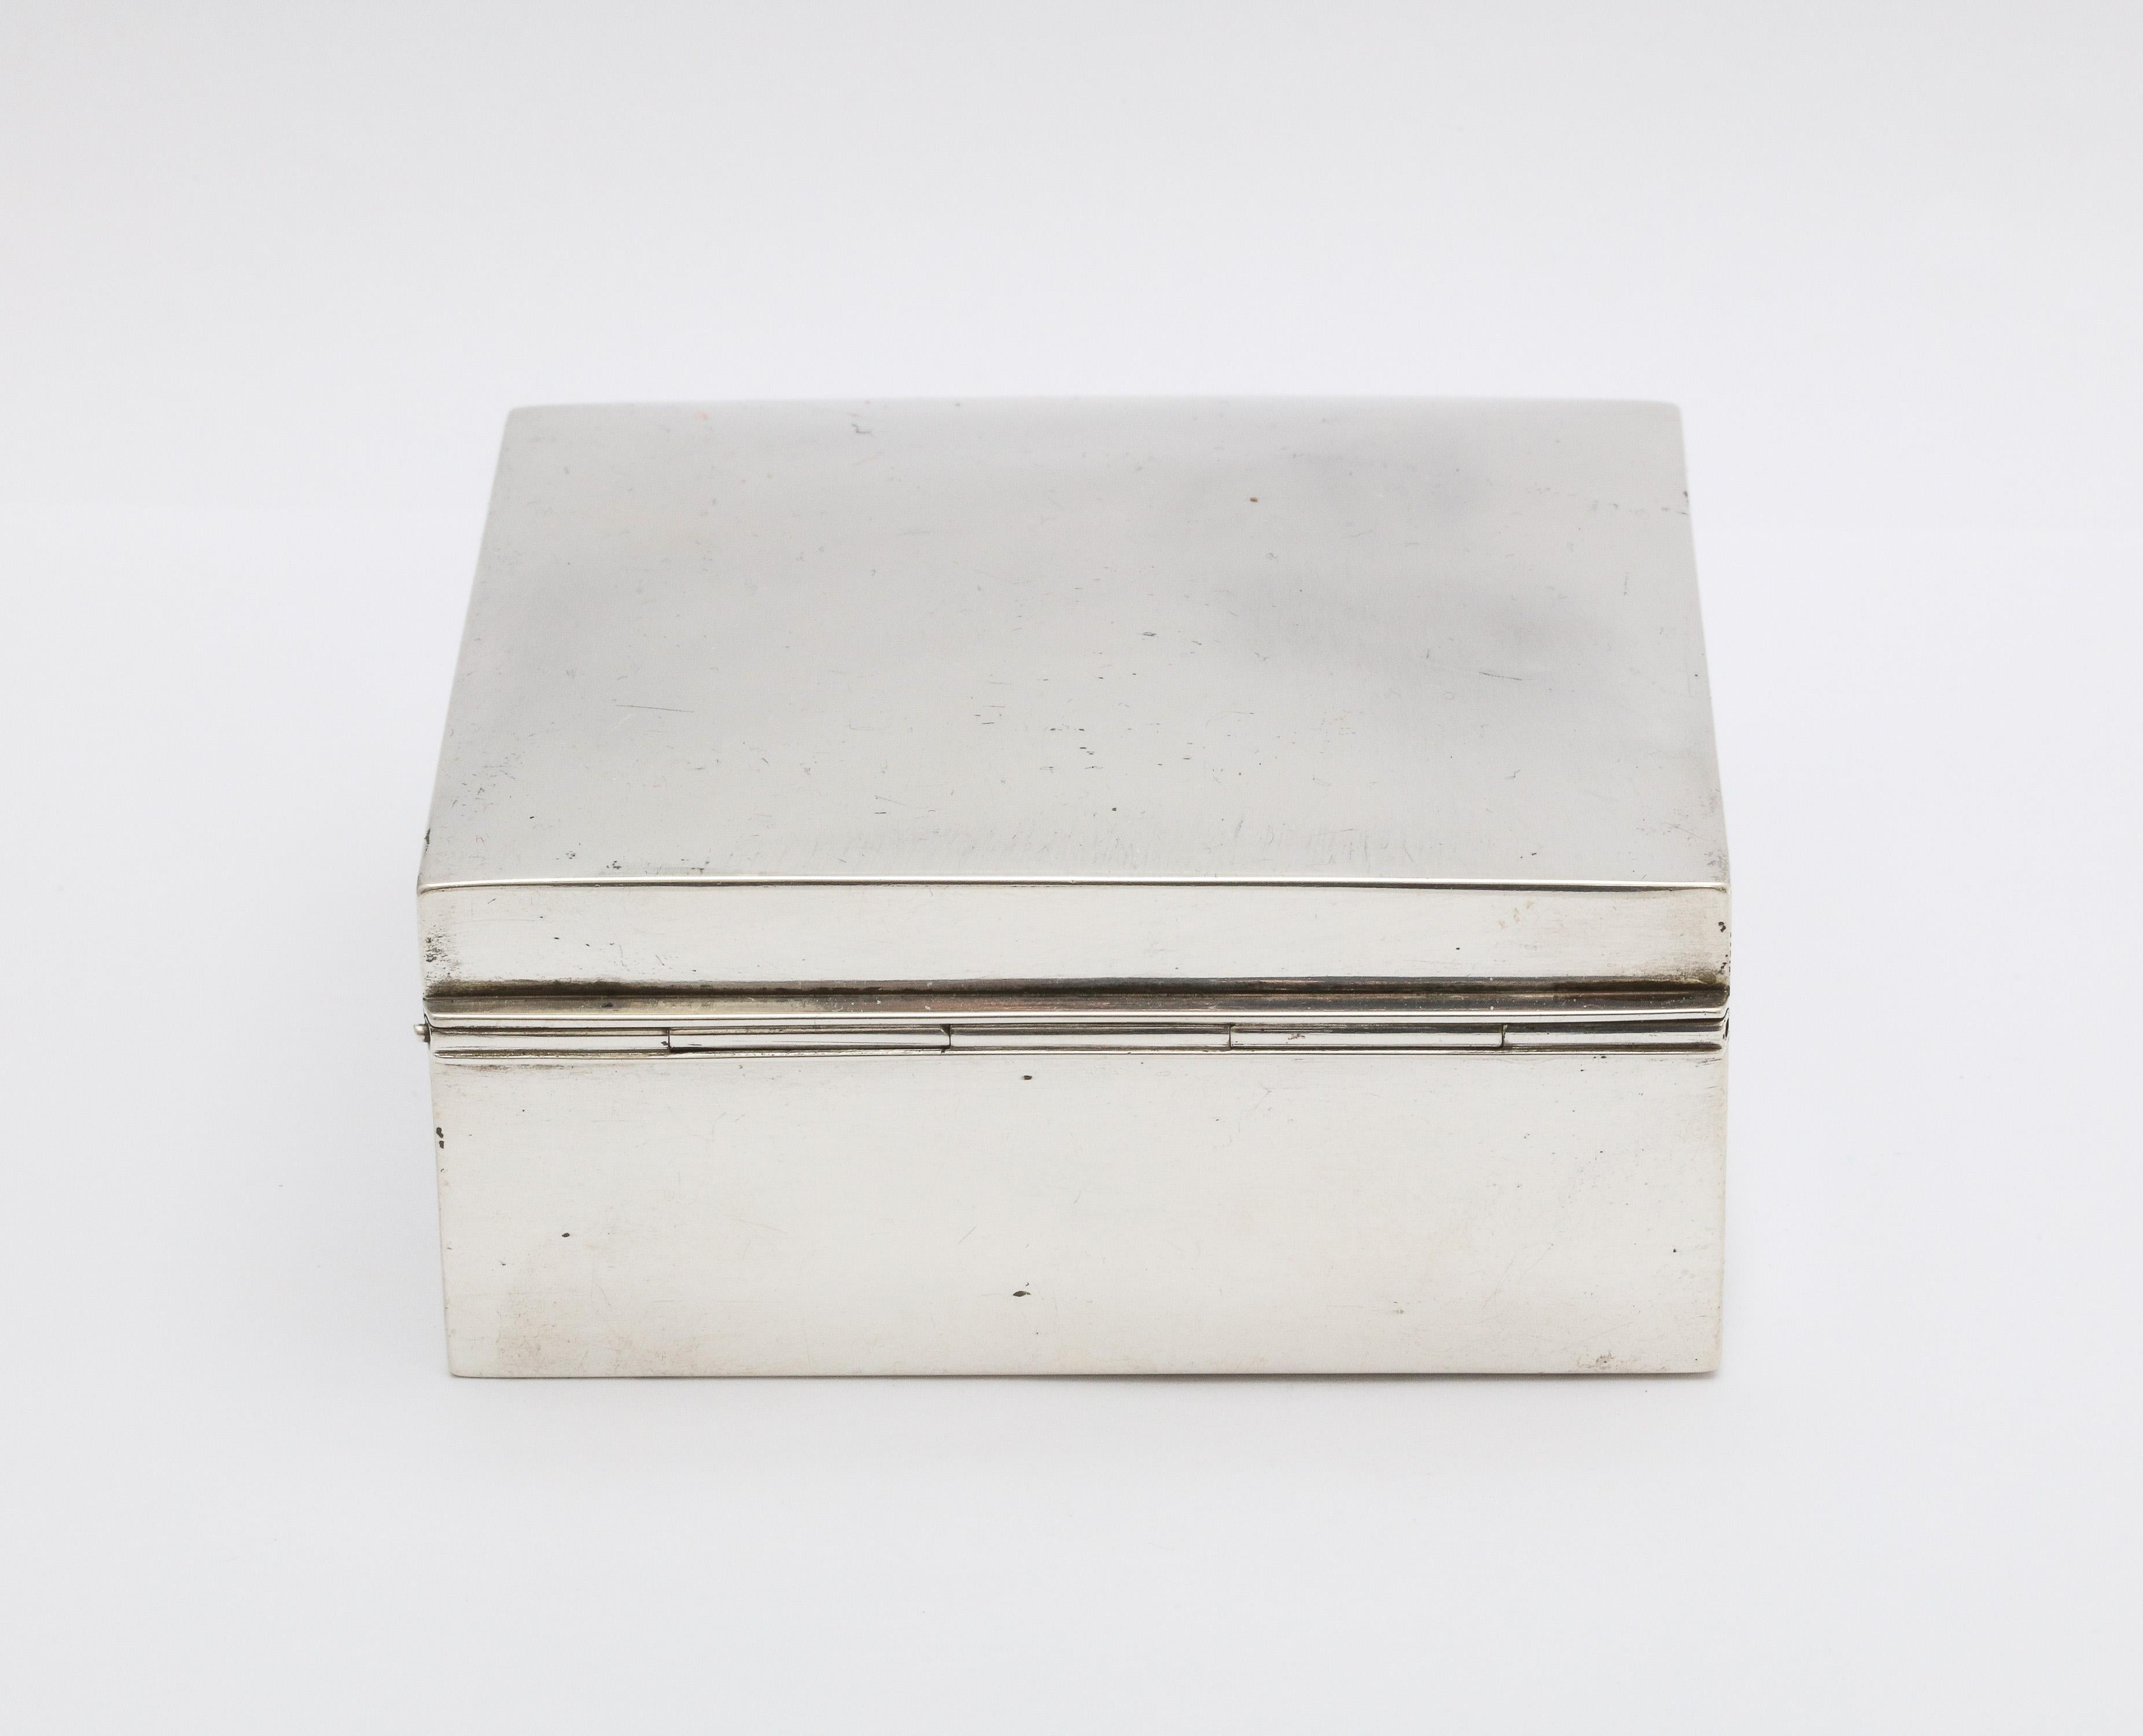 Gilt Art Deco Sterling Silver Table Box with Hinged Lid by Shreve & Co.